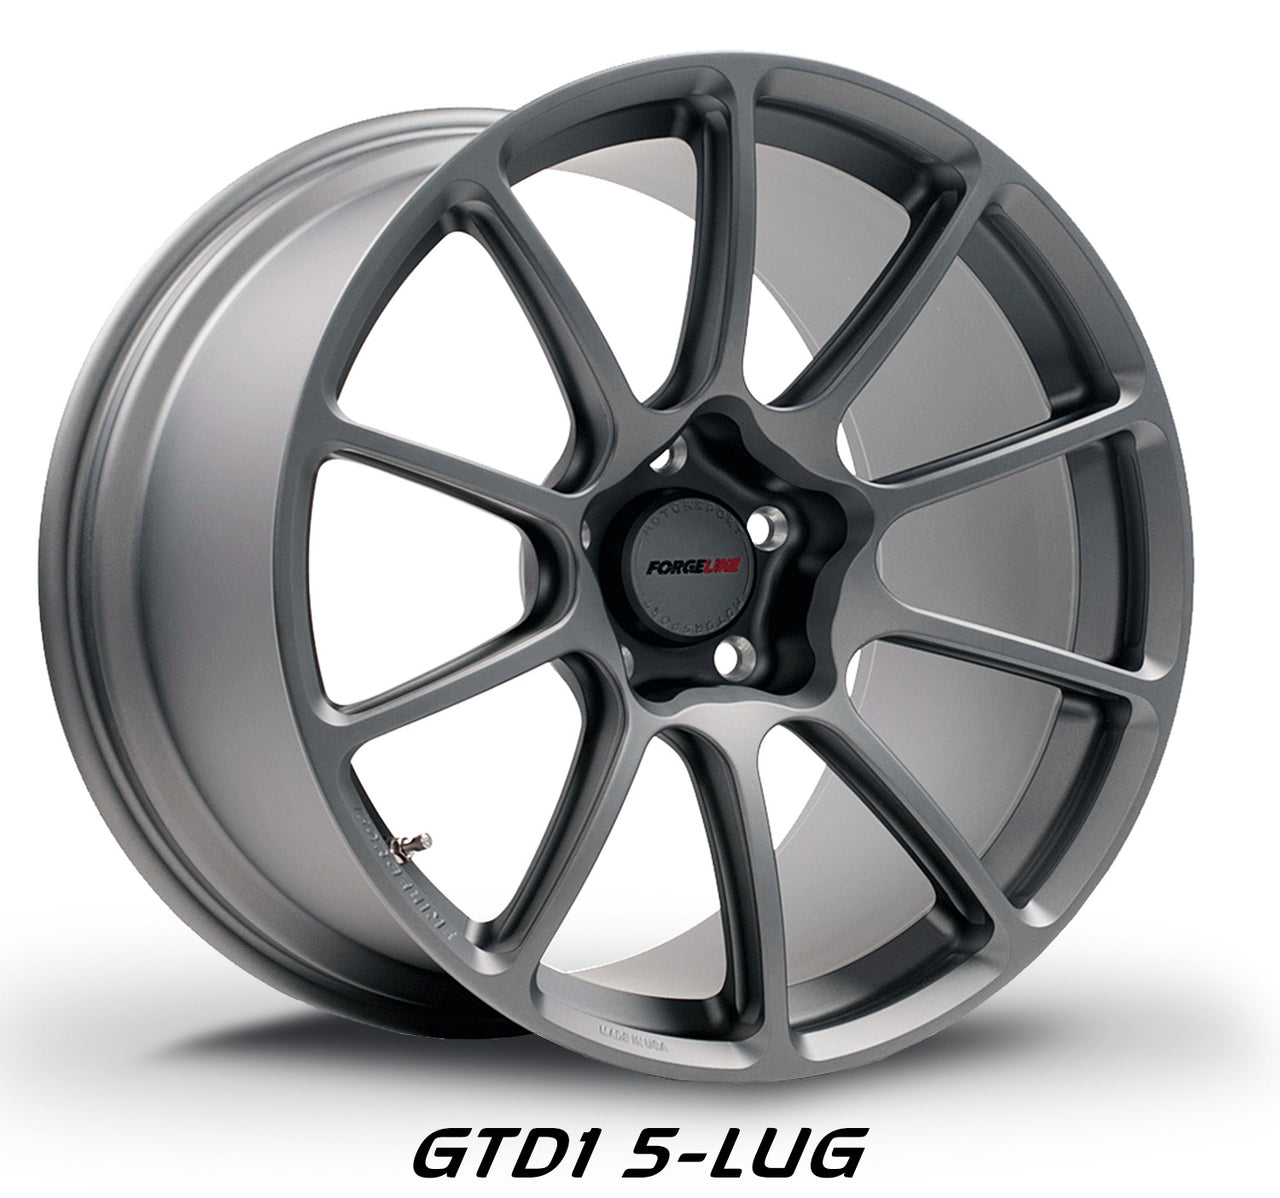 GTD1 5-Lug in Satin Titanium Forgeline Wheels Track Package is the easy way to get racing wheels for the C8 Corvette